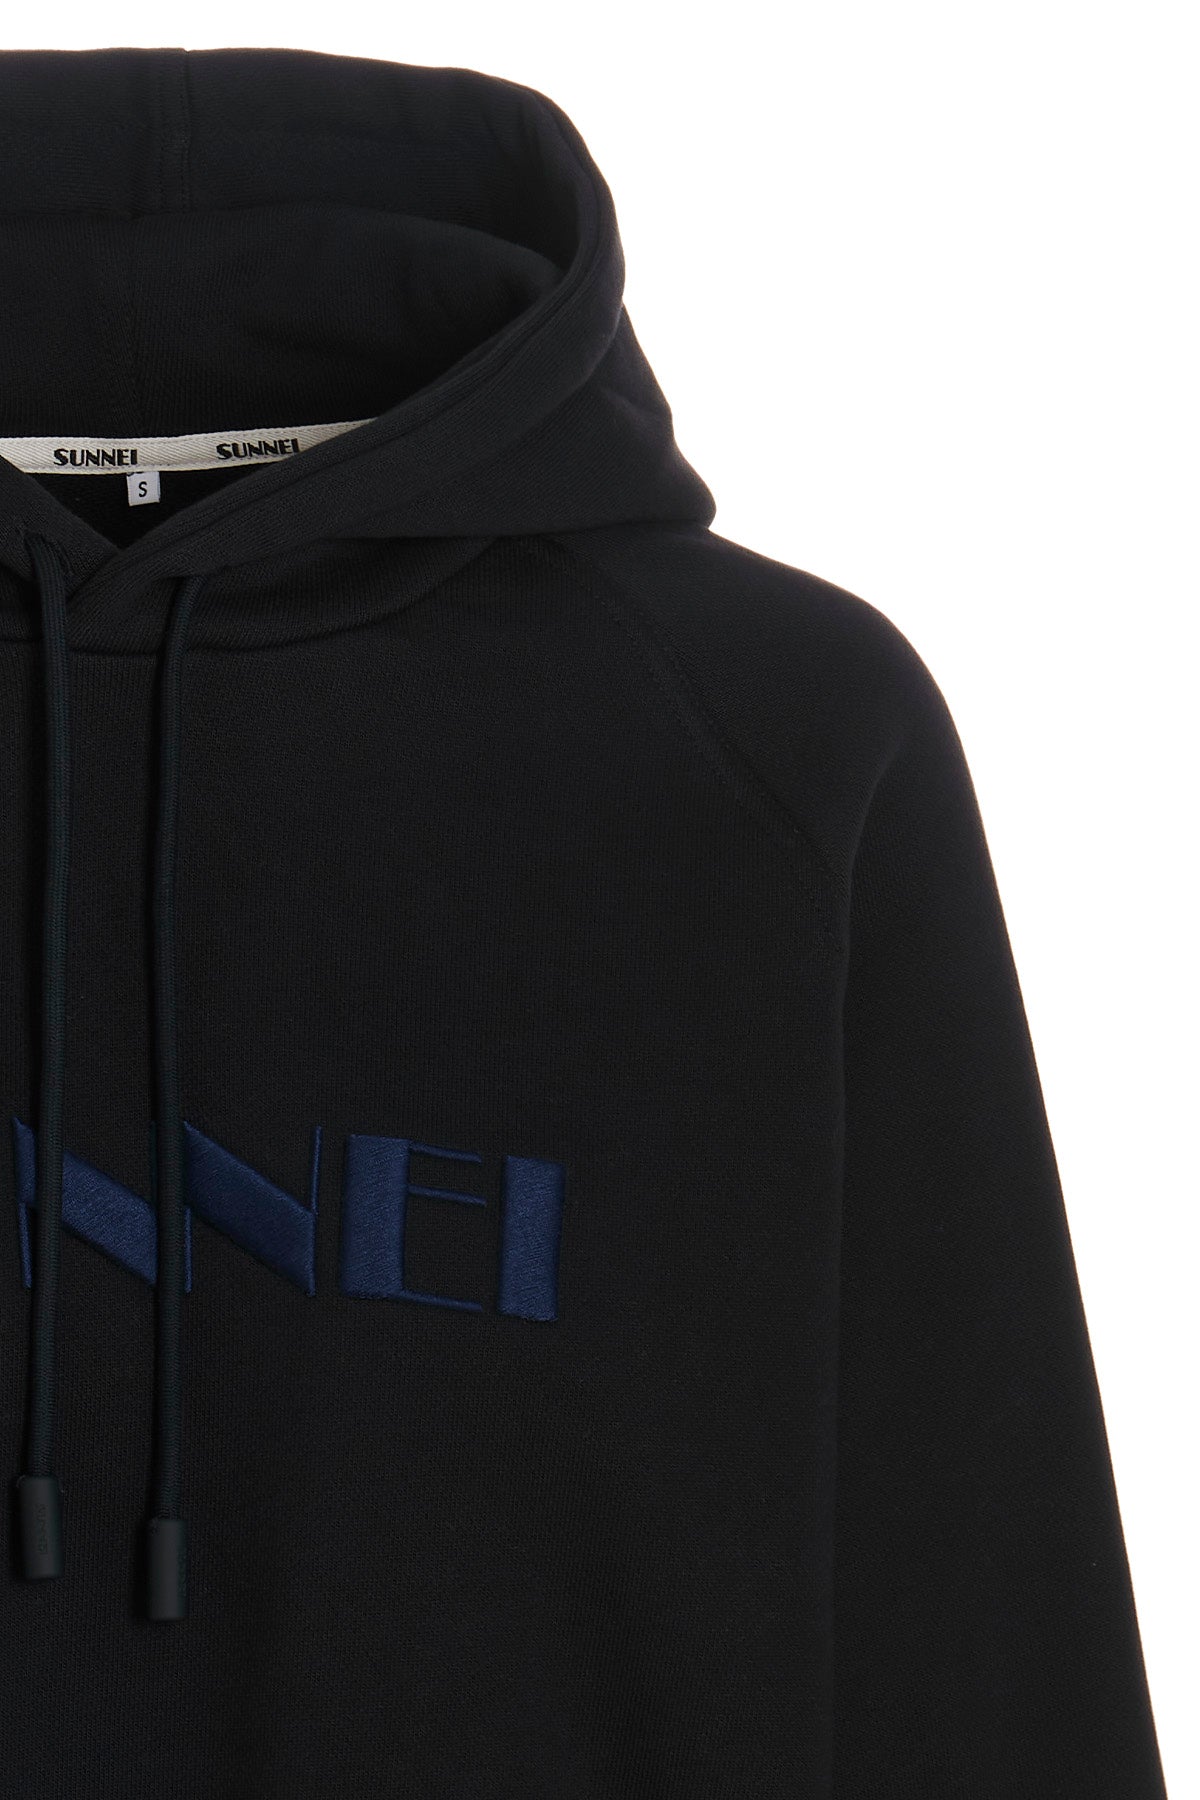 SUNNEI LOGO EMBROIDERY HOODIE CRTWXJER0090099